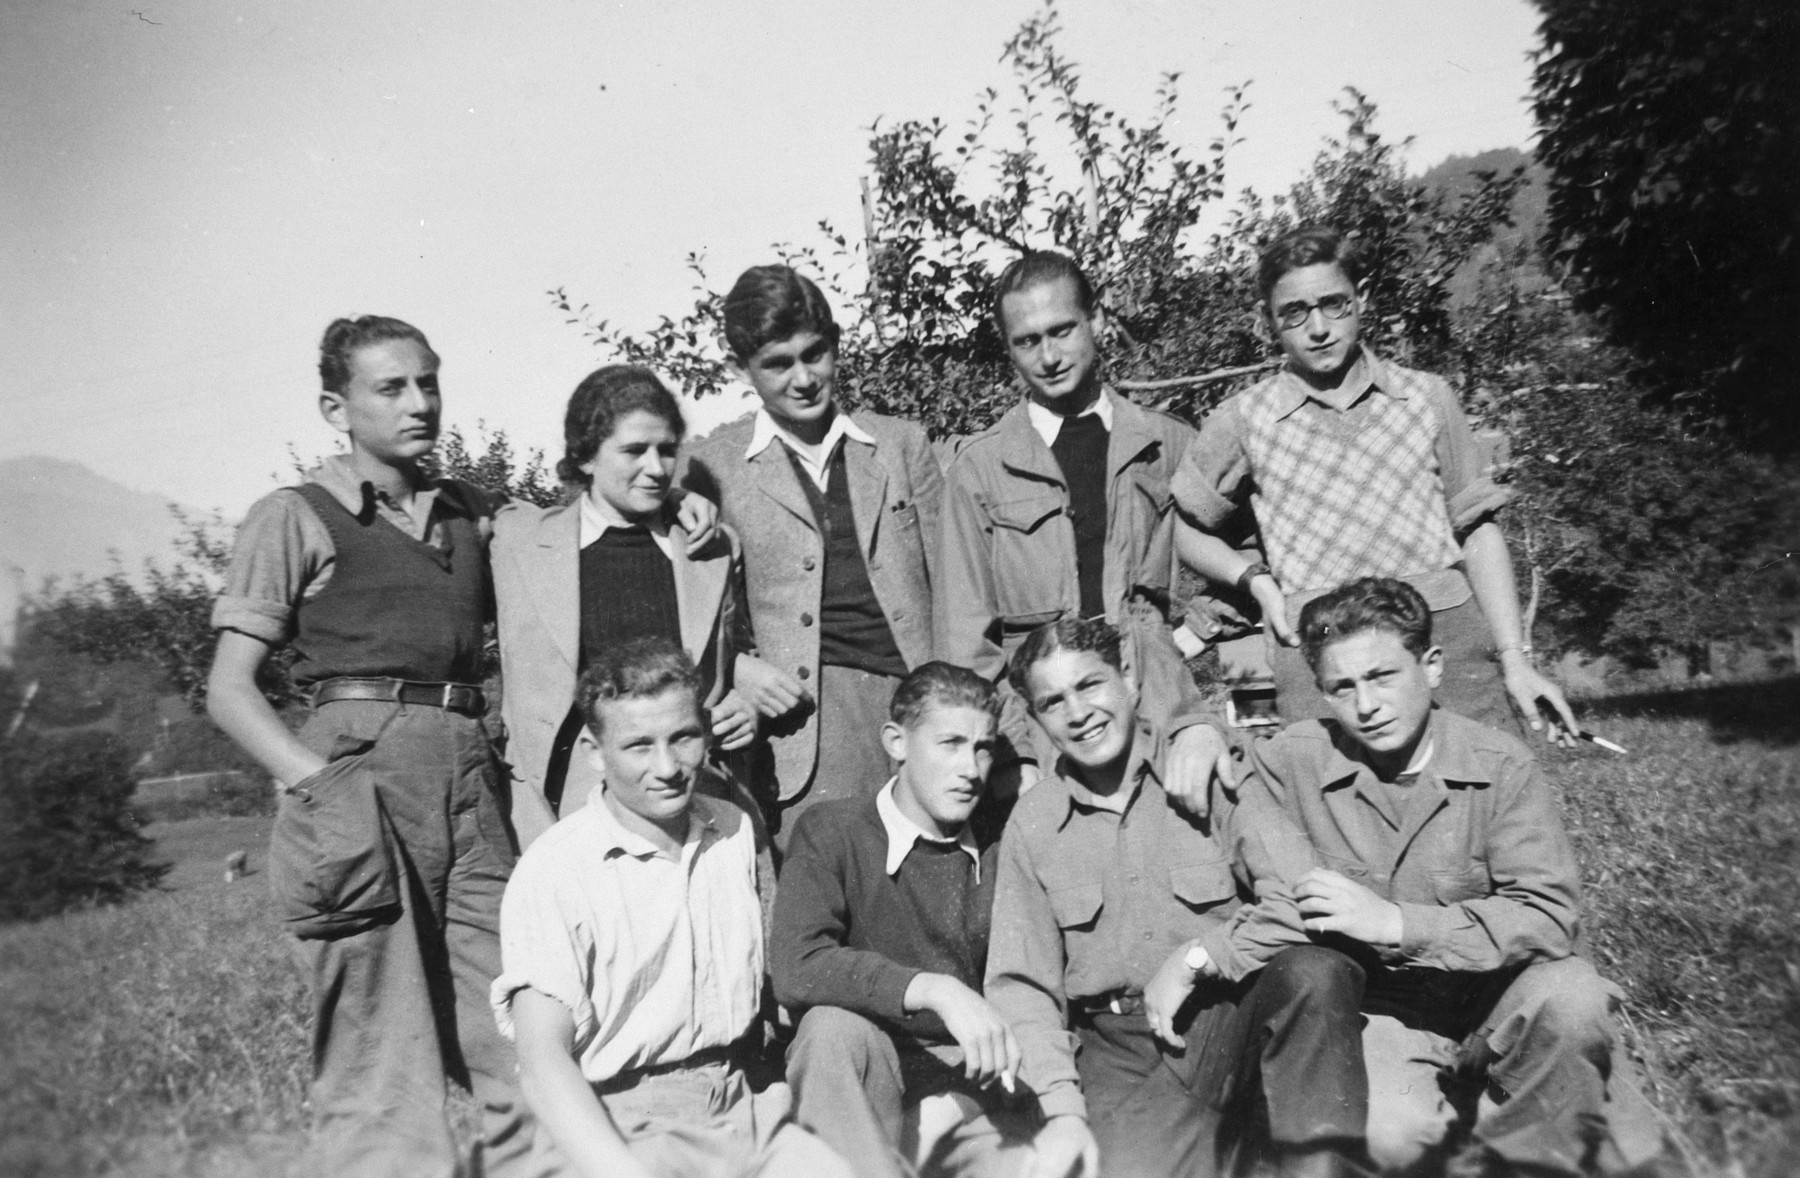 Group portrait of Jewish youth in a children's home in Switzerland.

Moniek Szmulewicz is pictured in the front row, second from the right.  Michael Rosenberg is standing, second row middle.